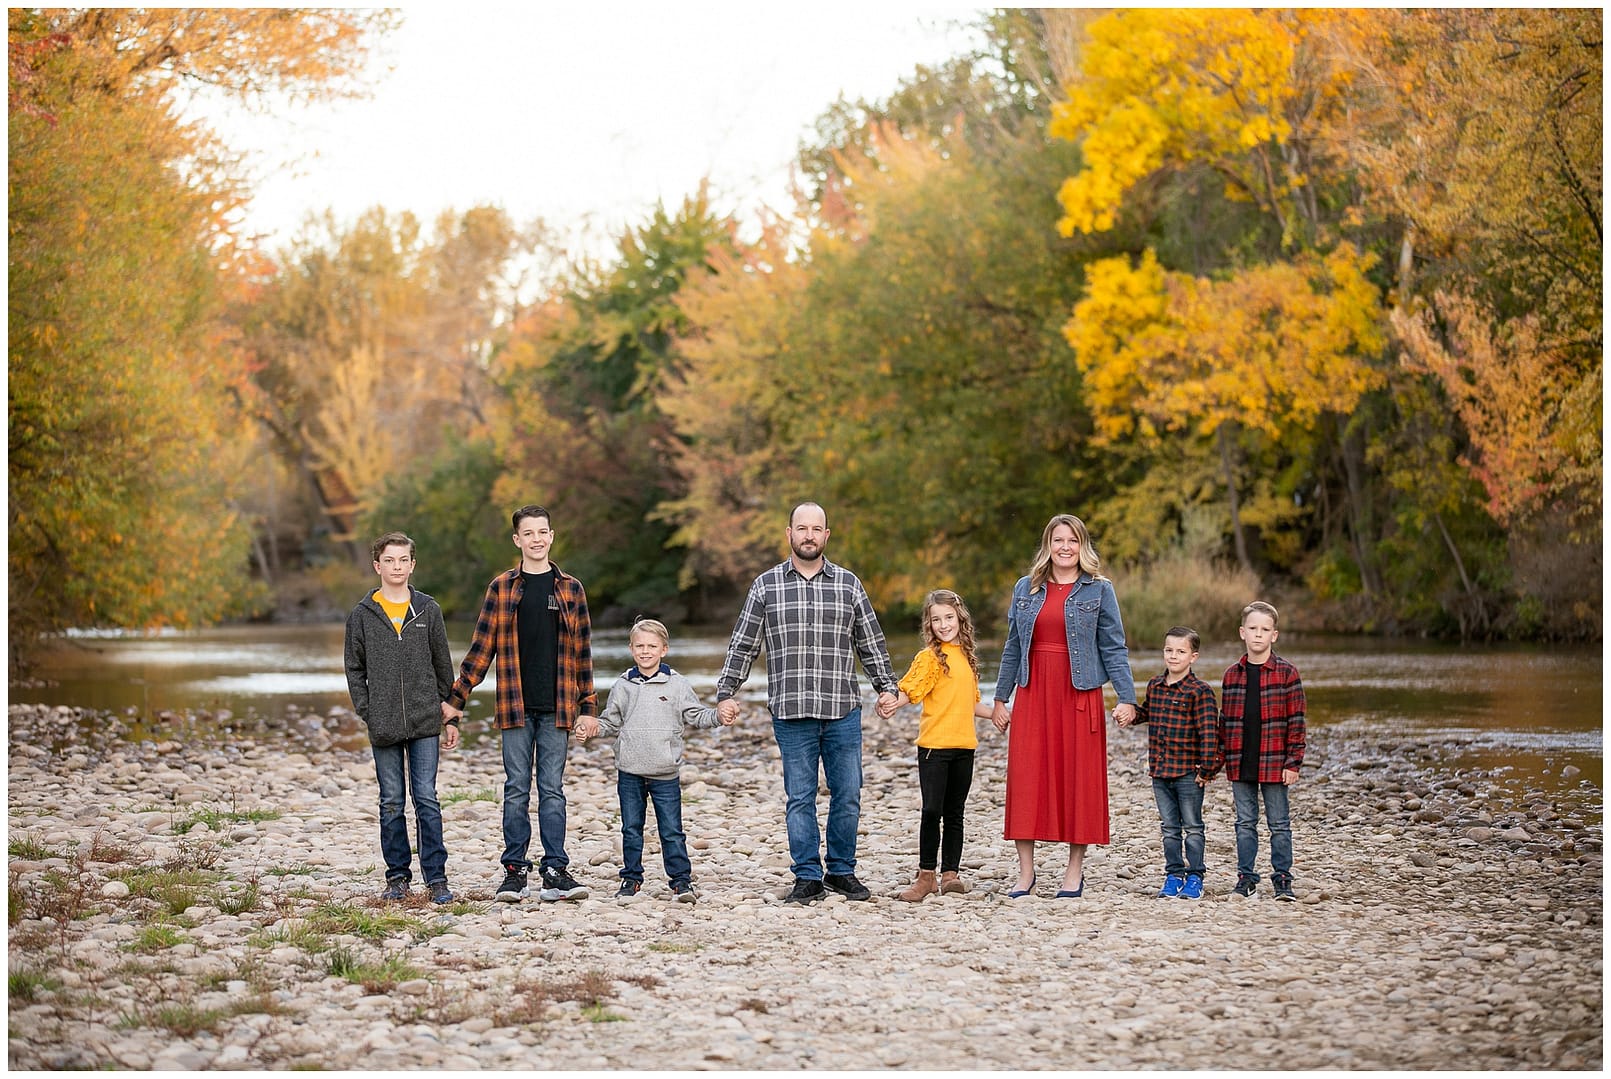 Boise family of eight holds hands in front of Boise River. Photos by Tiffany Hix Photography.